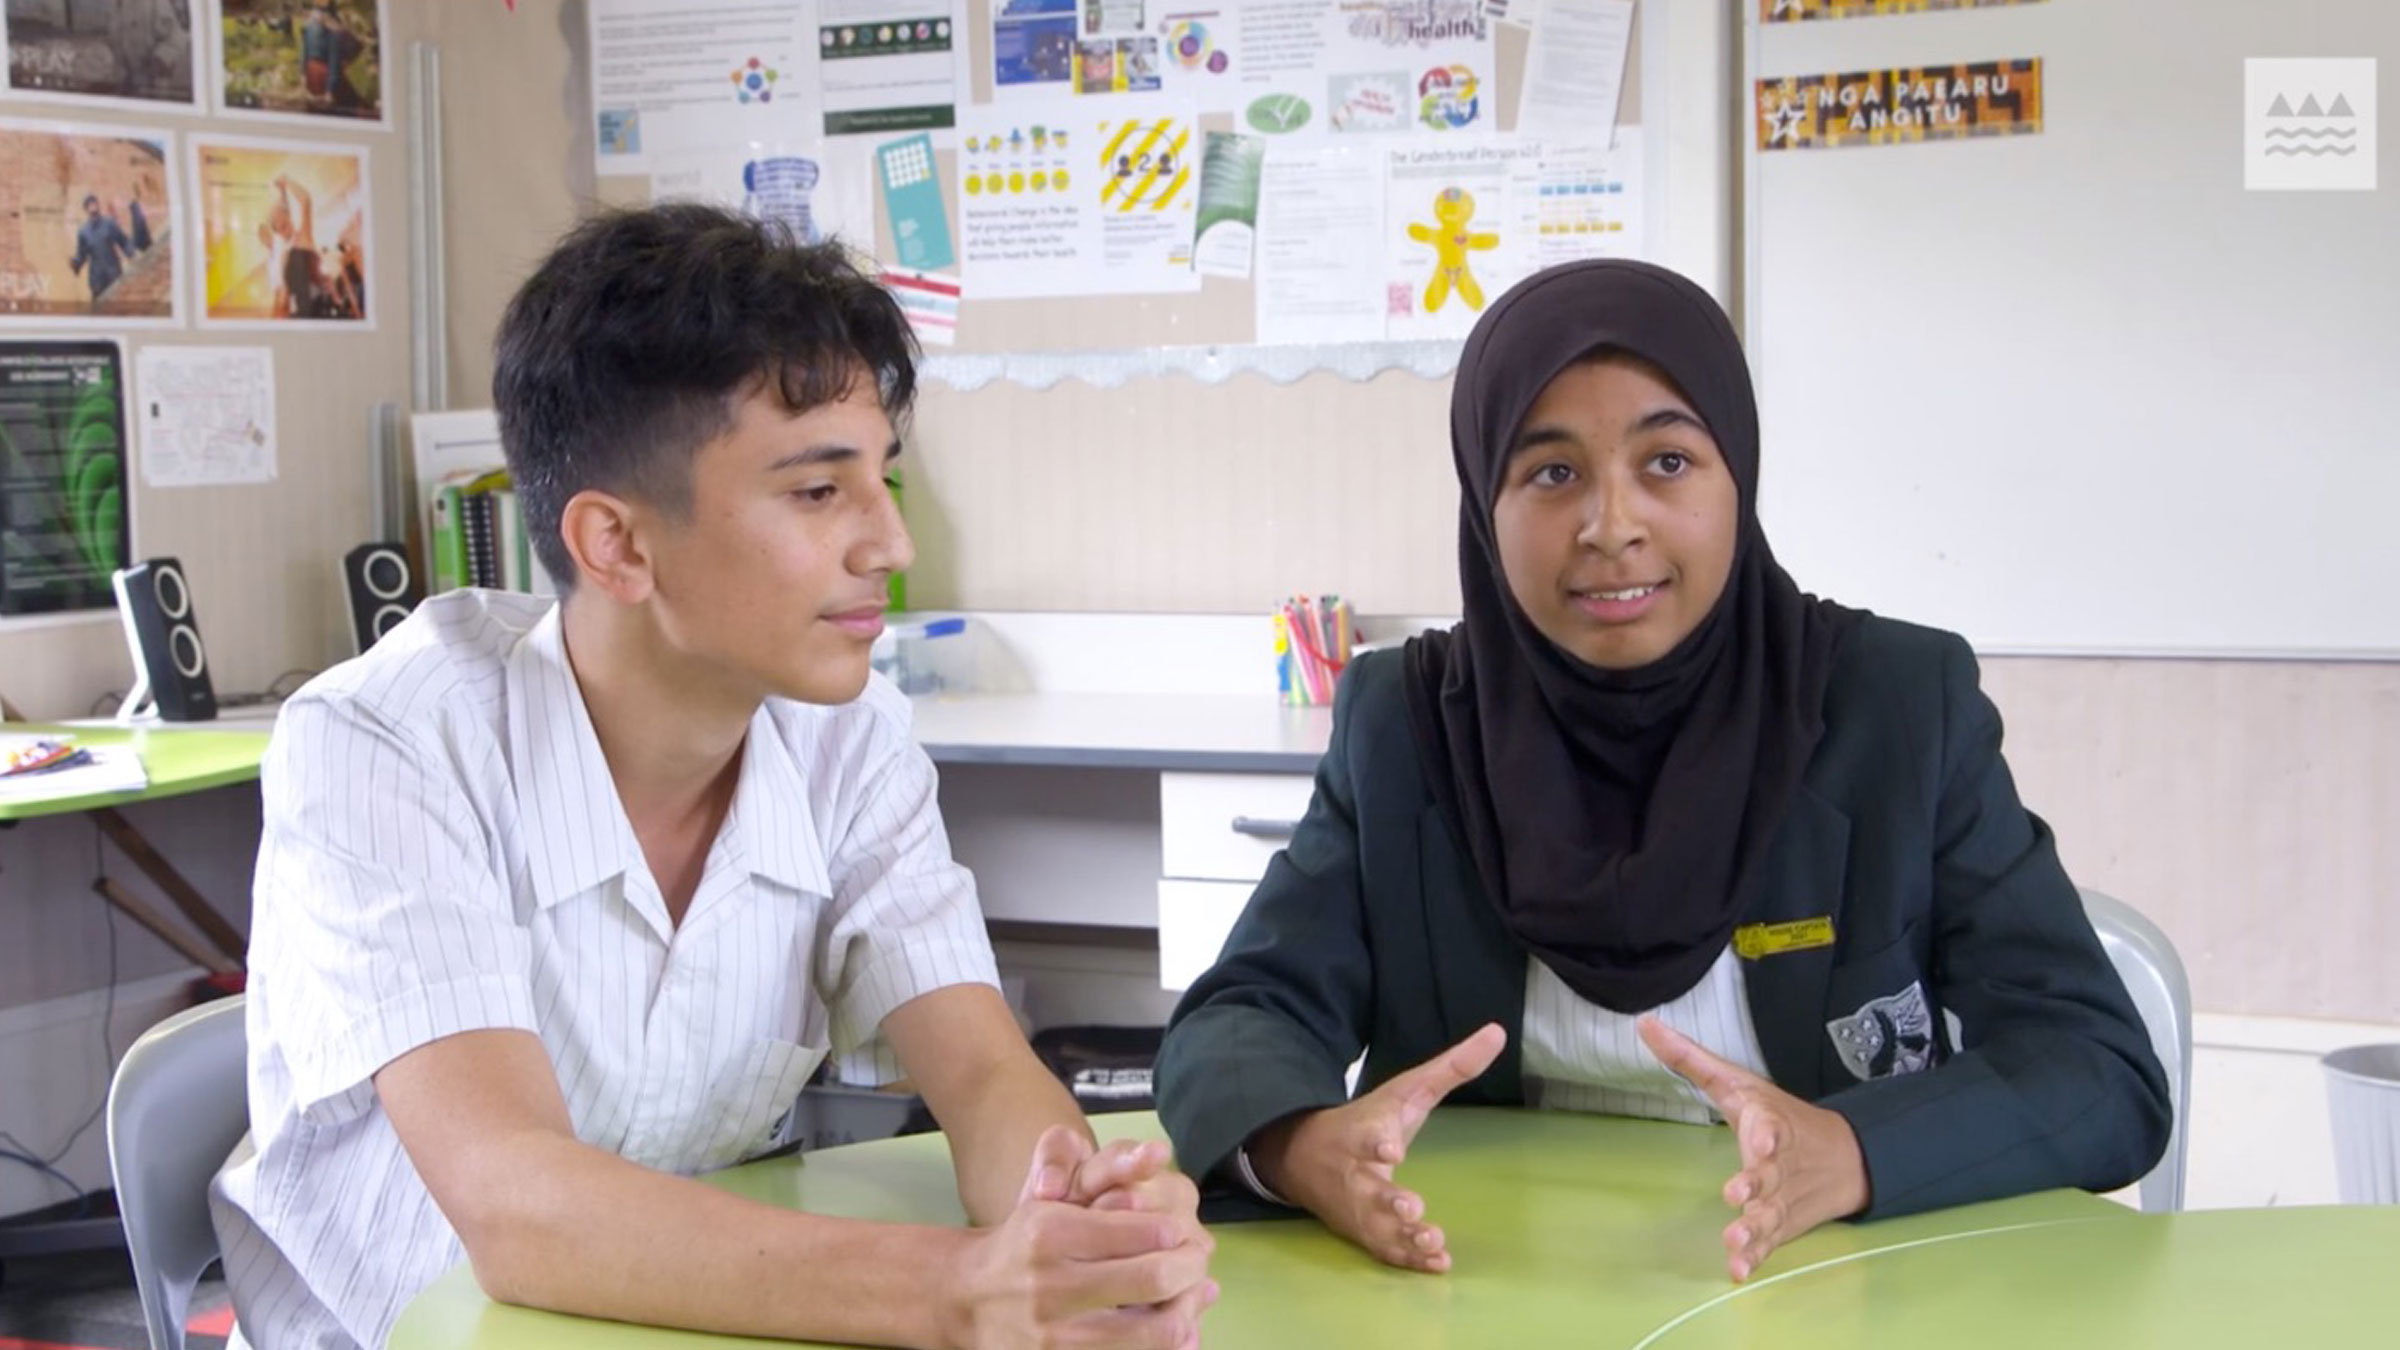 Two students being interviewed in a classroom setting